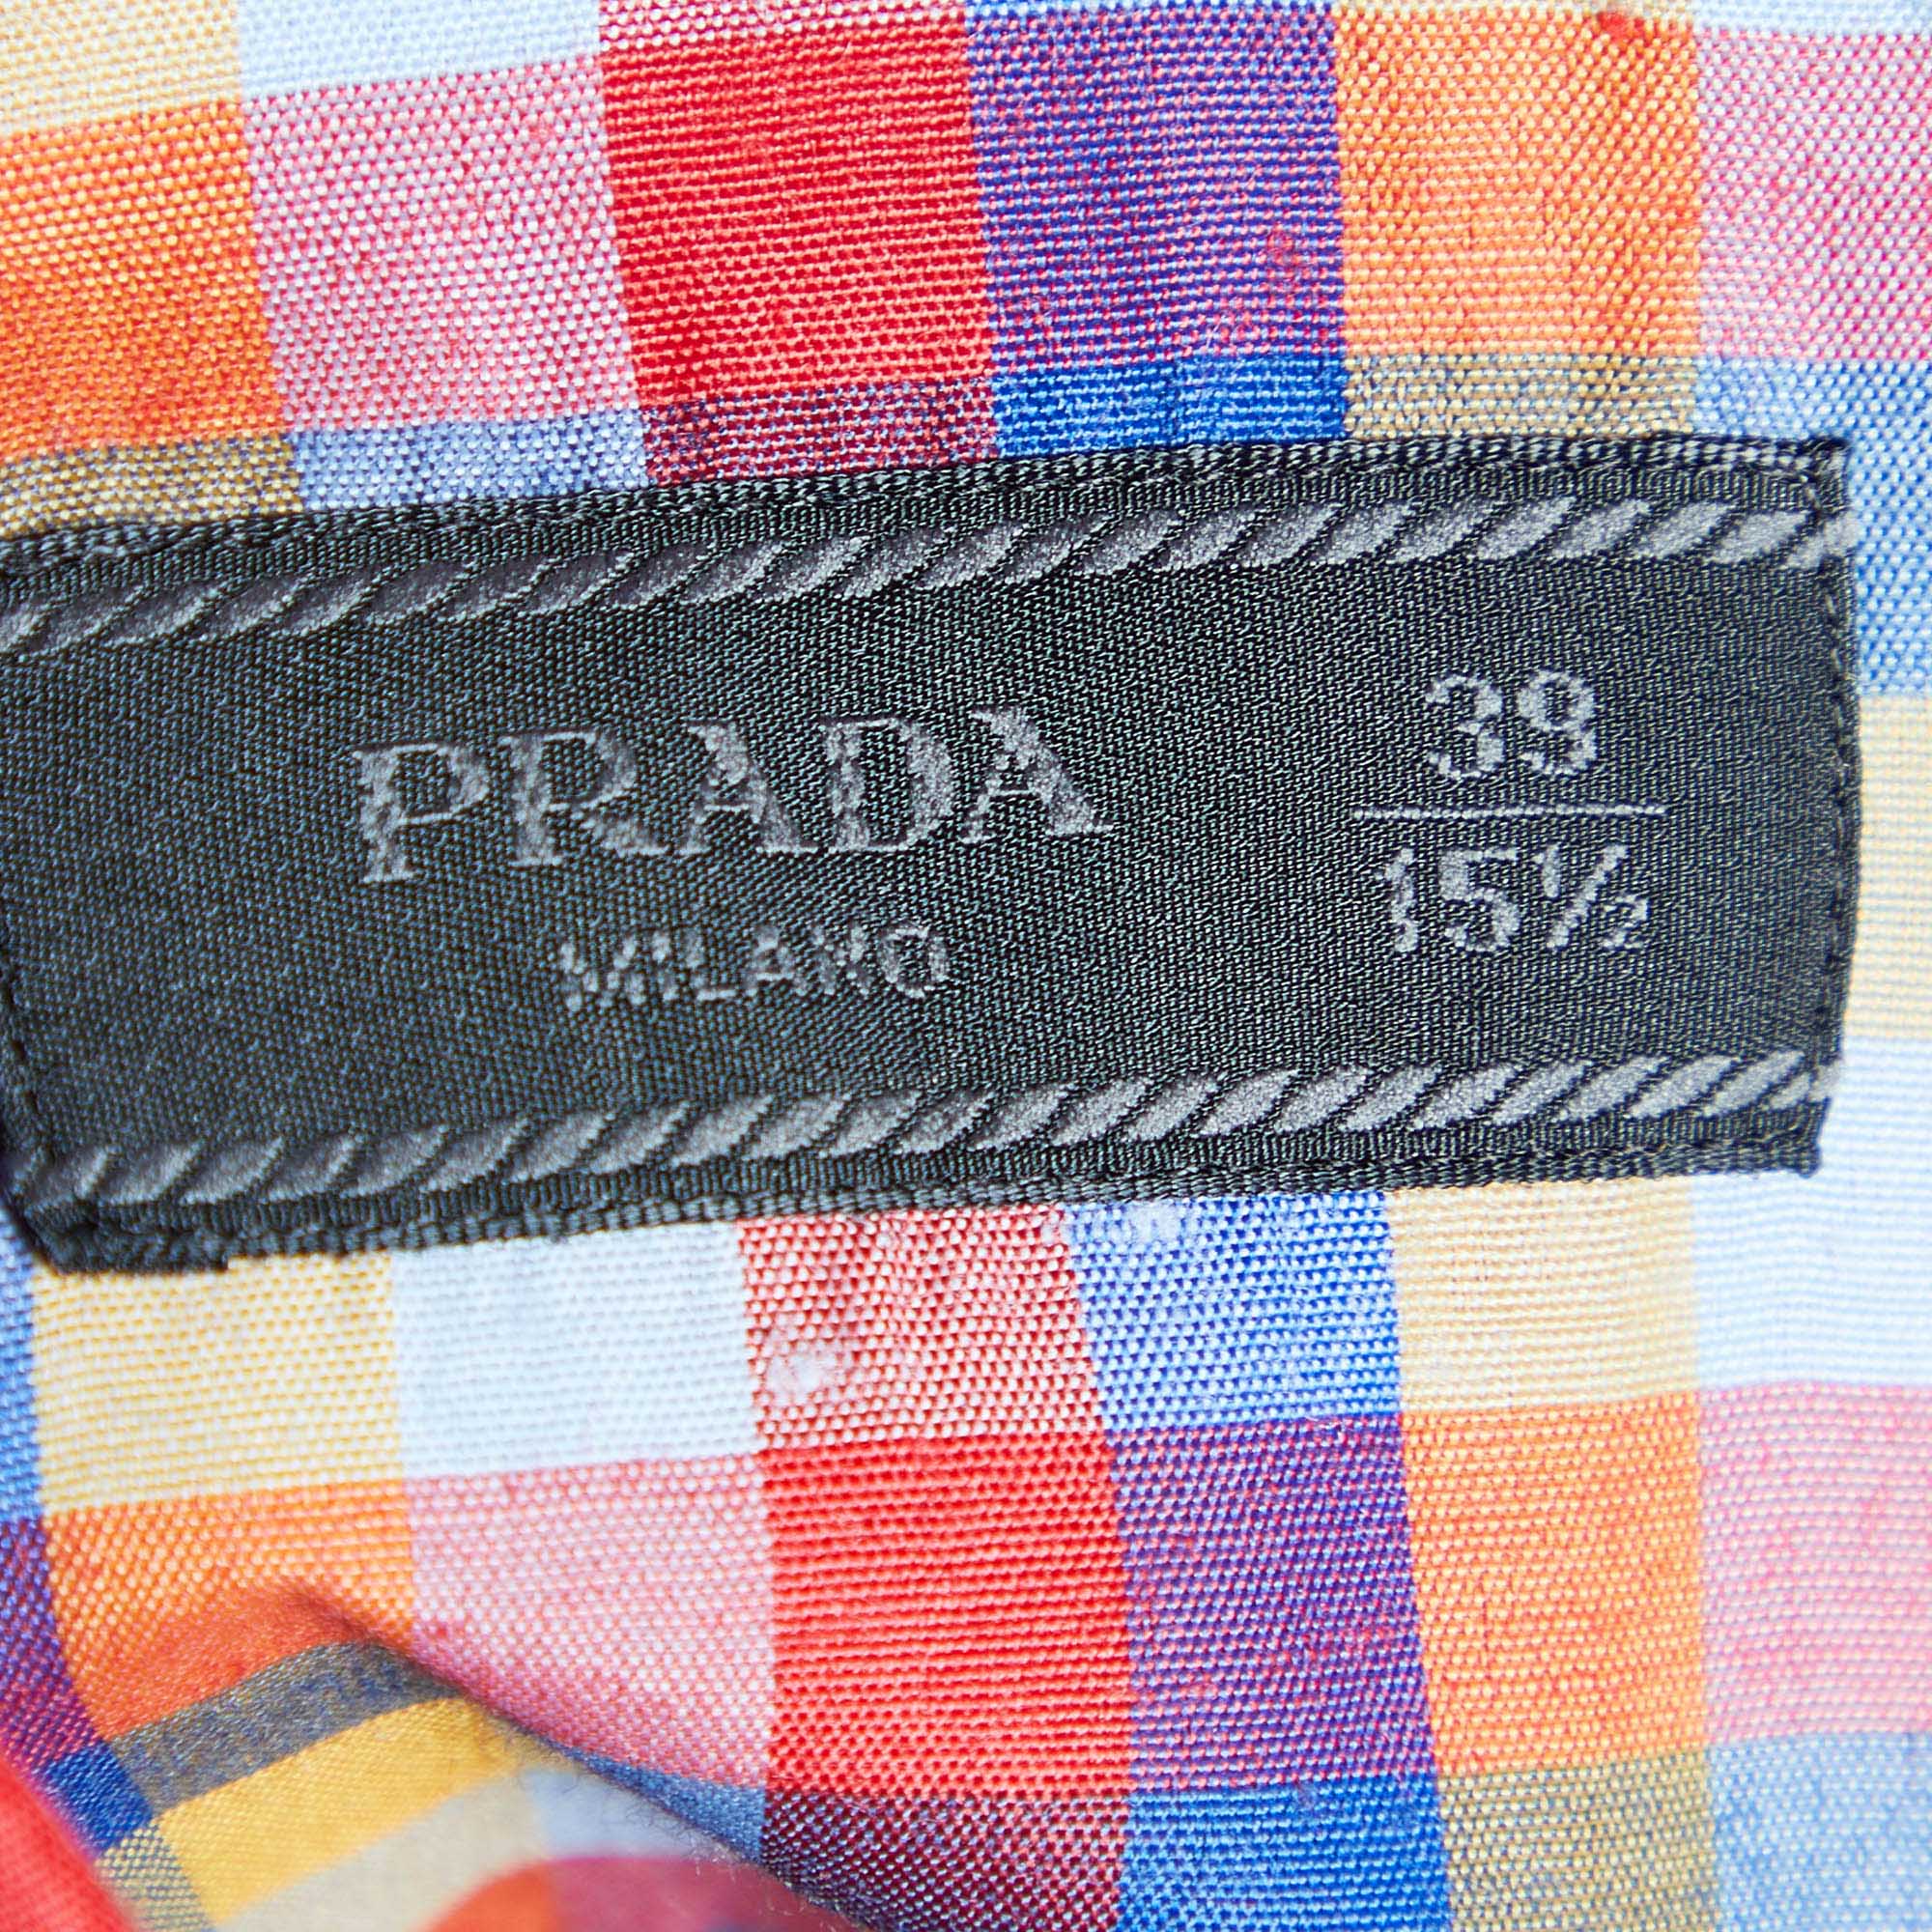 Prada Multicolor Plaided Twill Button Front Shirt M